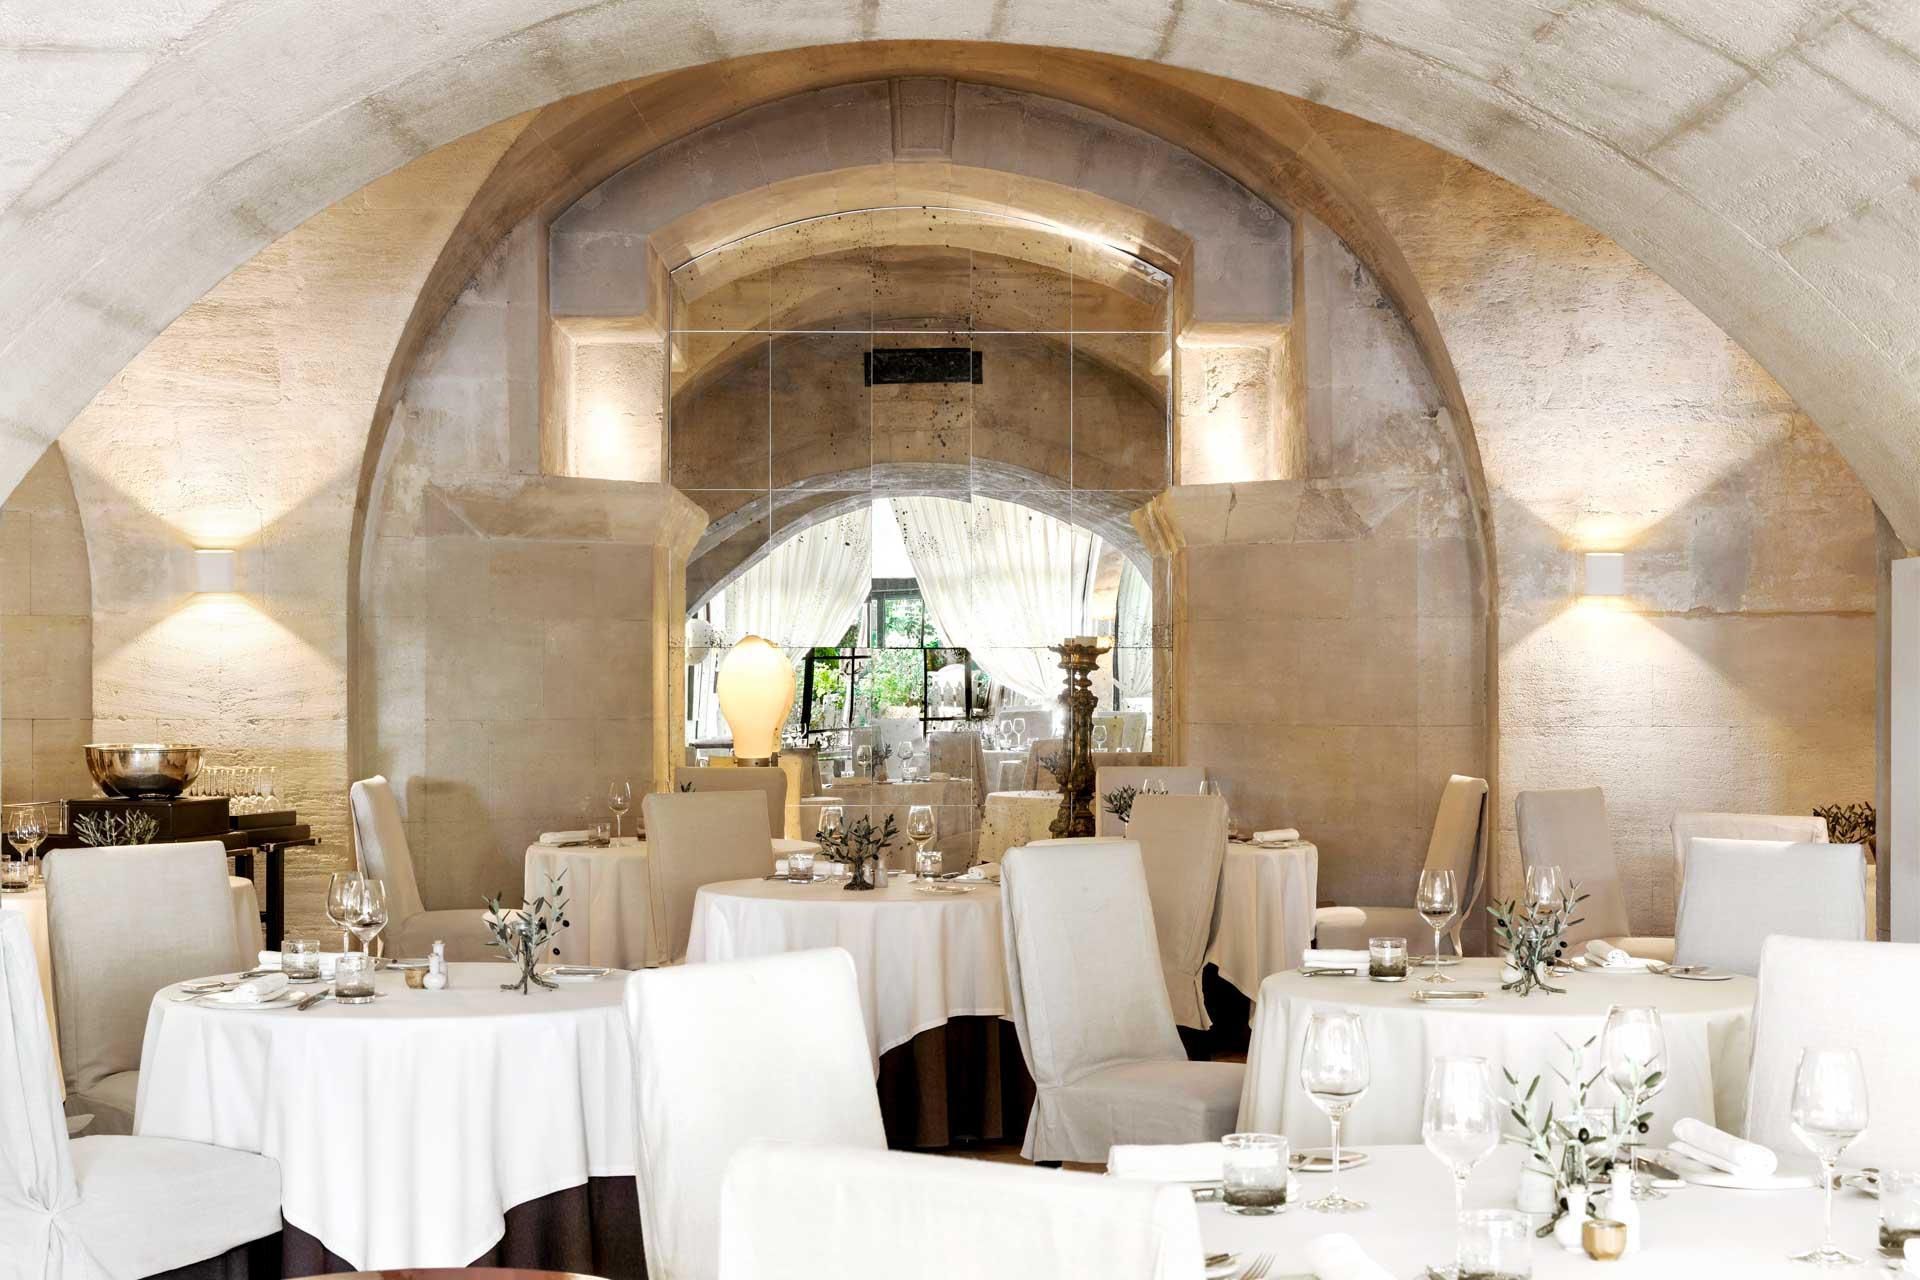 The historic vaulted room of Oustau de Baumanière, all made of master stone, the ideal setting for a romantic weekend of apotheosis